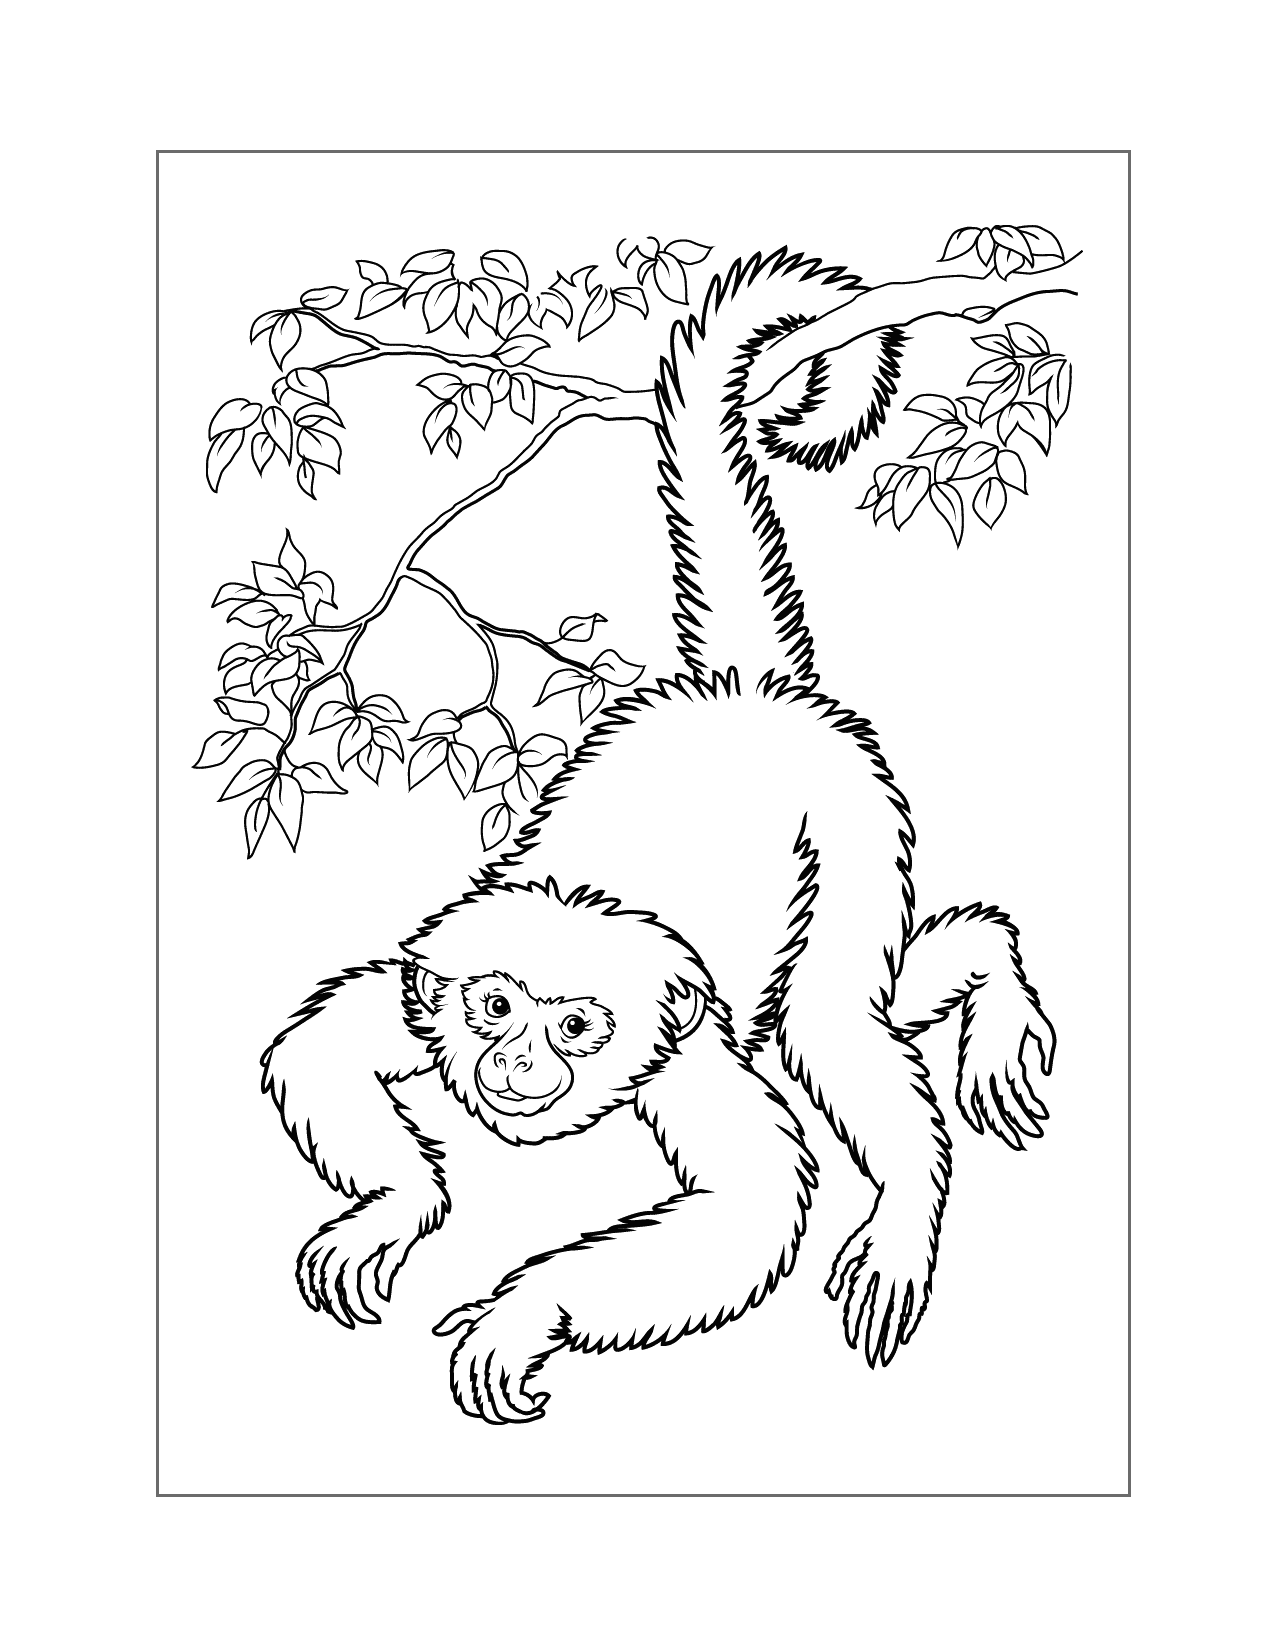 Monkey Hanging From Tree By Tail Coloring Page